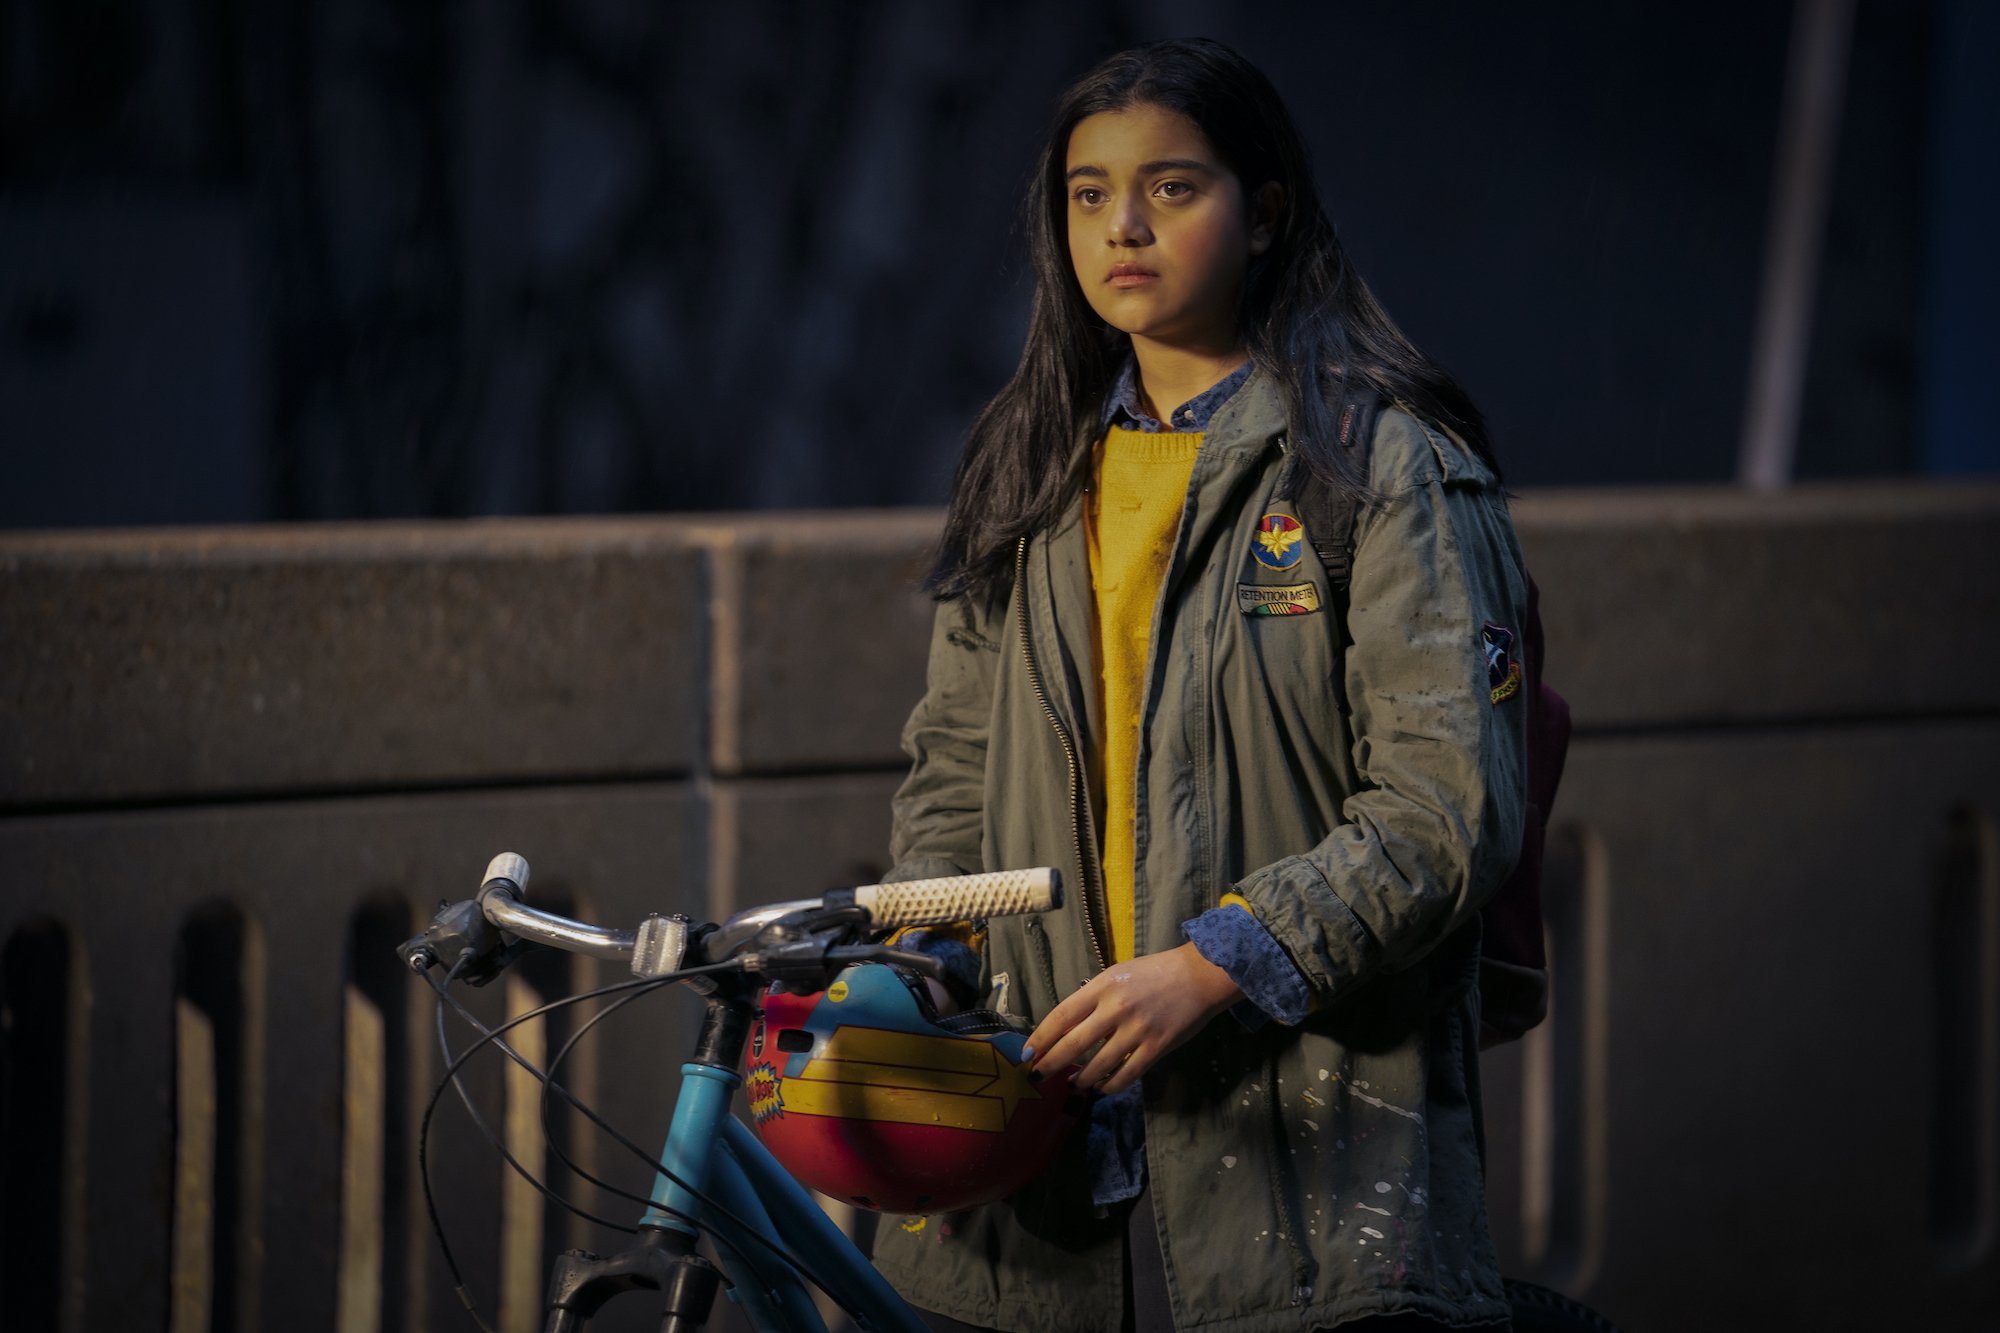 Iman Vellani, in character as Kamala Khan in 'Ms. Marvel' on Disney+, wears a gray jacket over a yellow sweater while sitting on her bike.